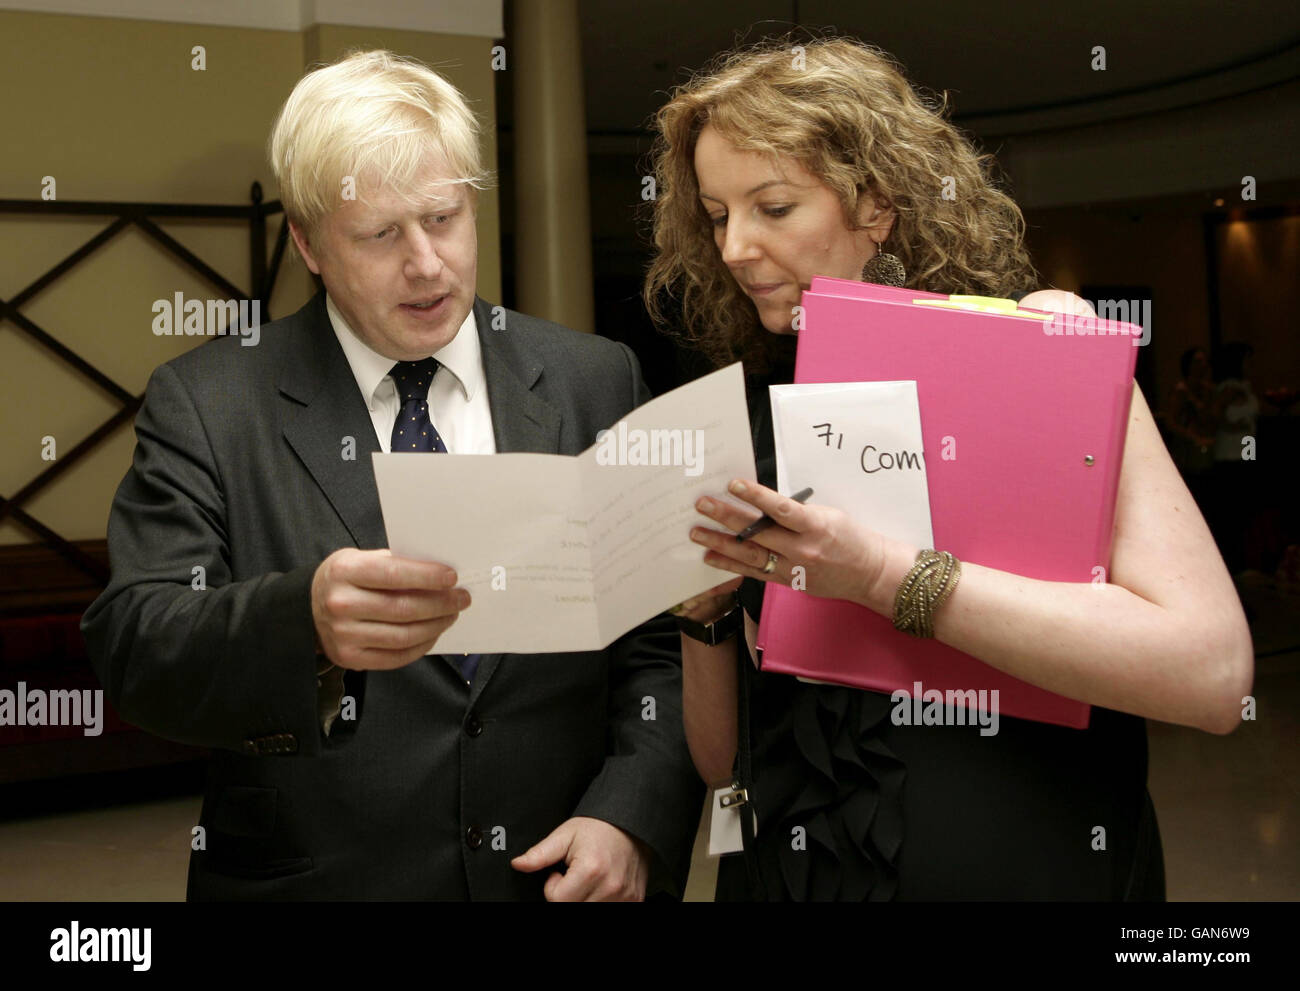 Boris Johnson, Mayor of London, gets briefed by Riza Turner to present the Community Award to Capital Radio during the Sony Radio Academy Awards at the Grosvenor House Hotel in central London. Stock Photo